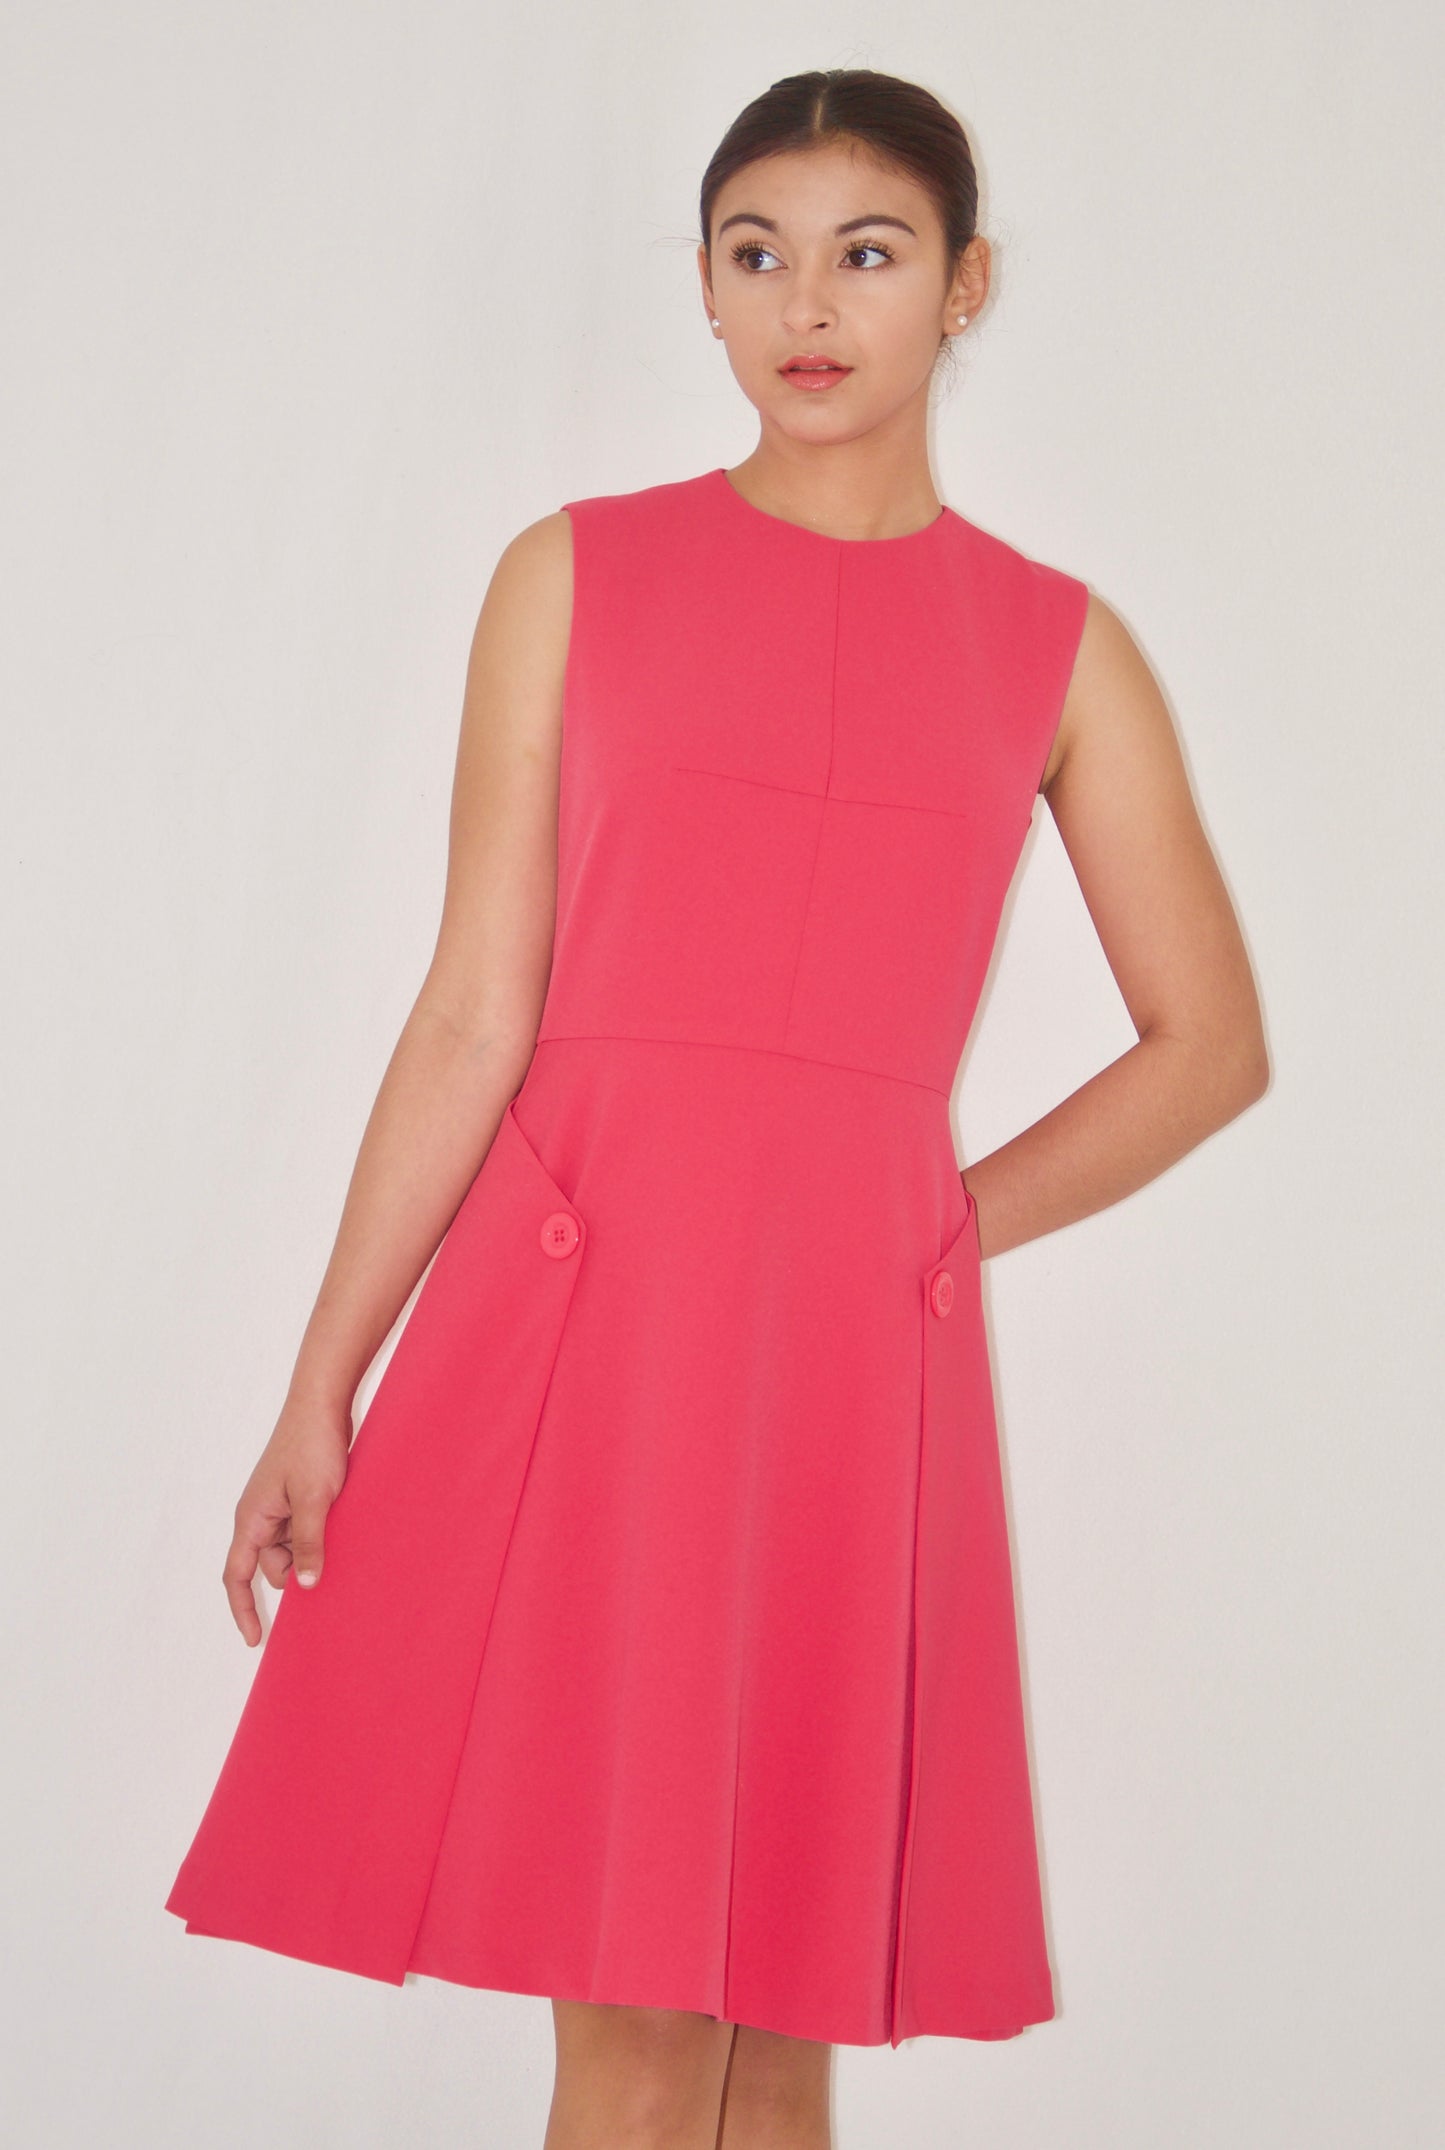 Pink with Button Detail Dress